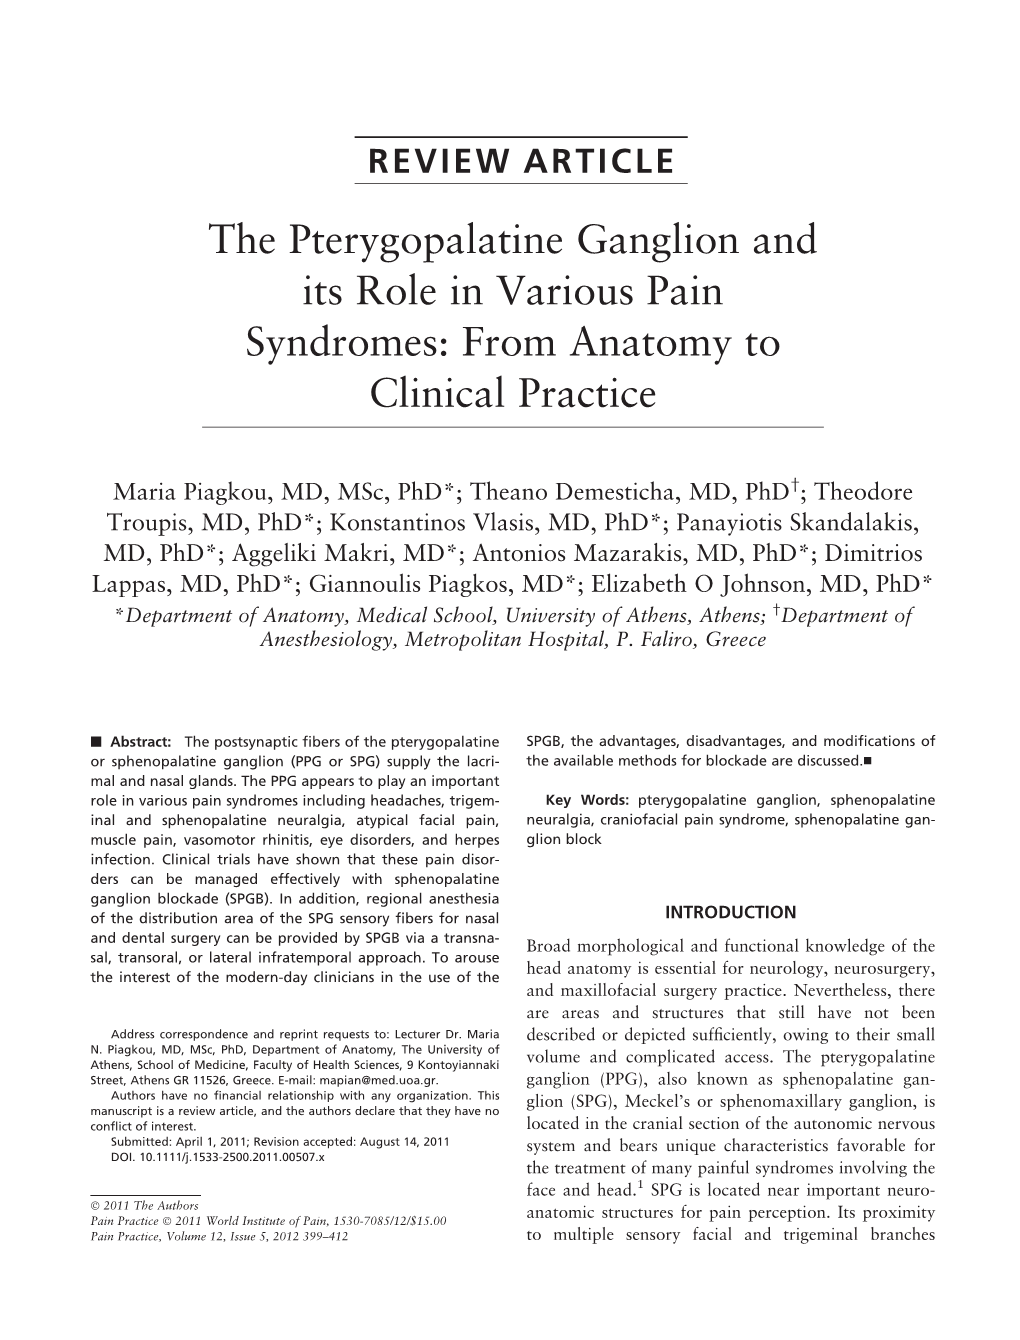 The Pterygopalatine Ganglion and Its Role in Various Pain Syndromes: from Anatomy to Clinical Practice